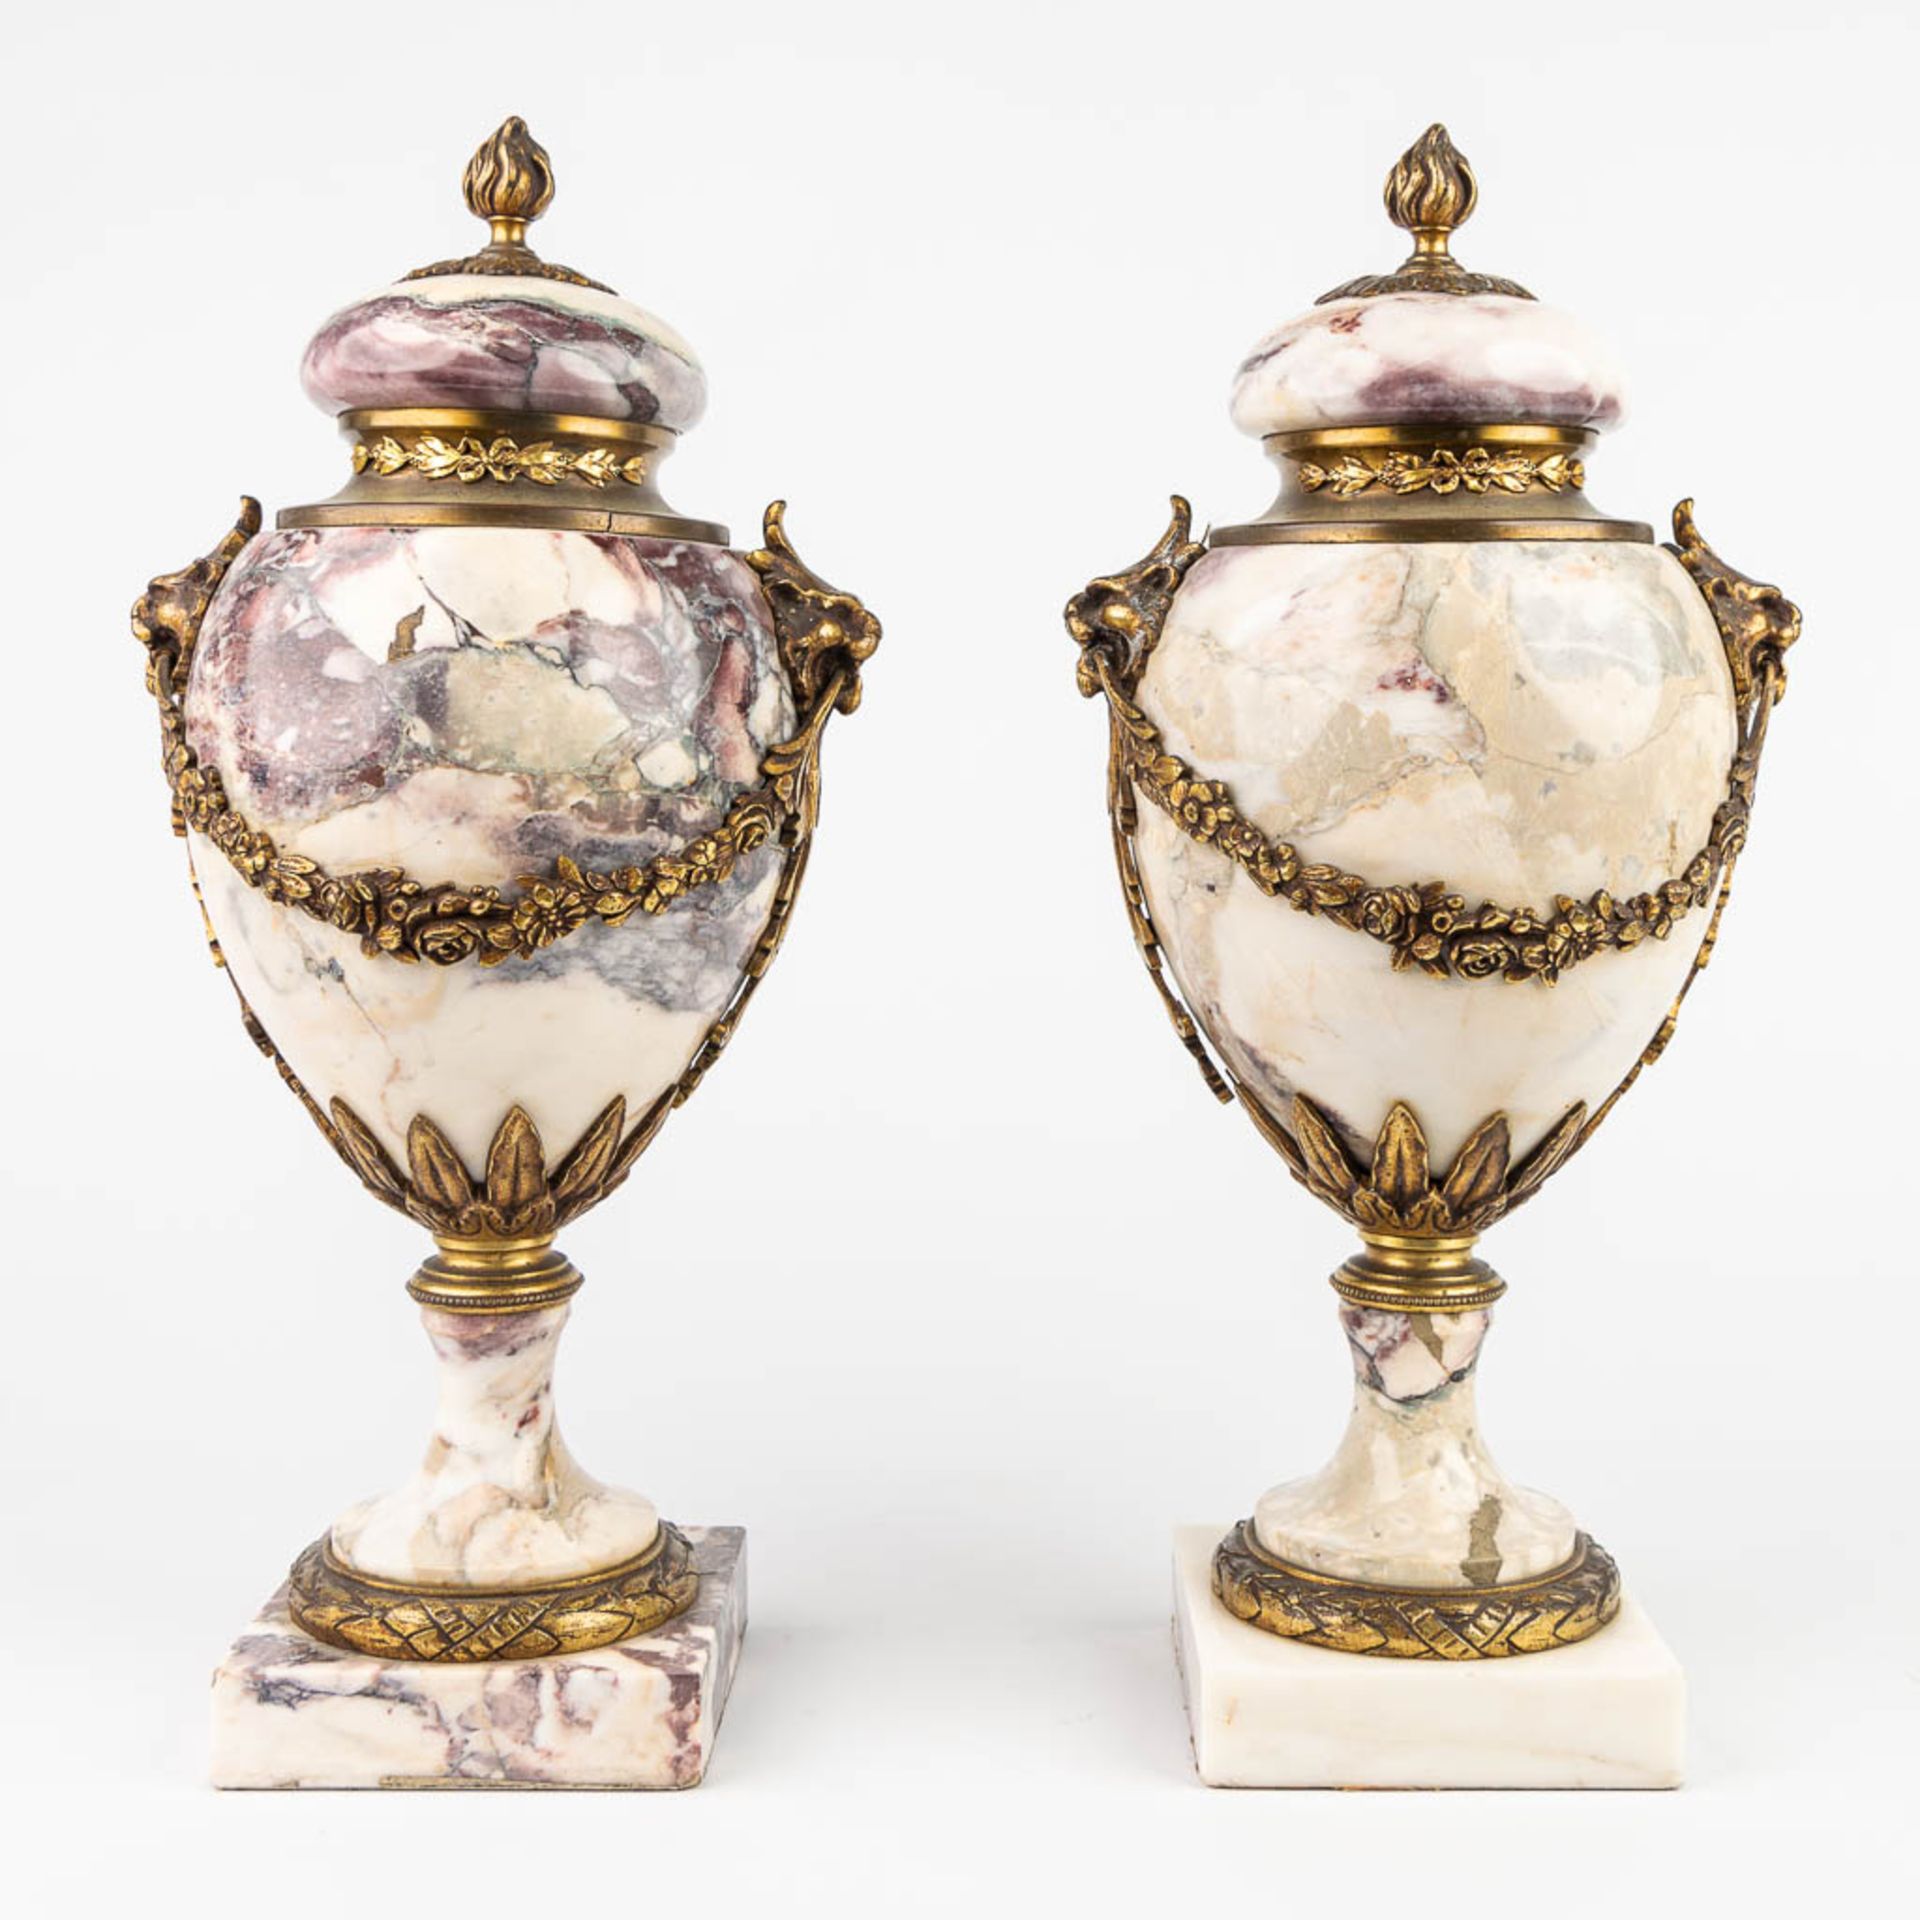 A pair of cassolettes made of marble and mounted with bronze. (H:40cm) - Image 5 of 15